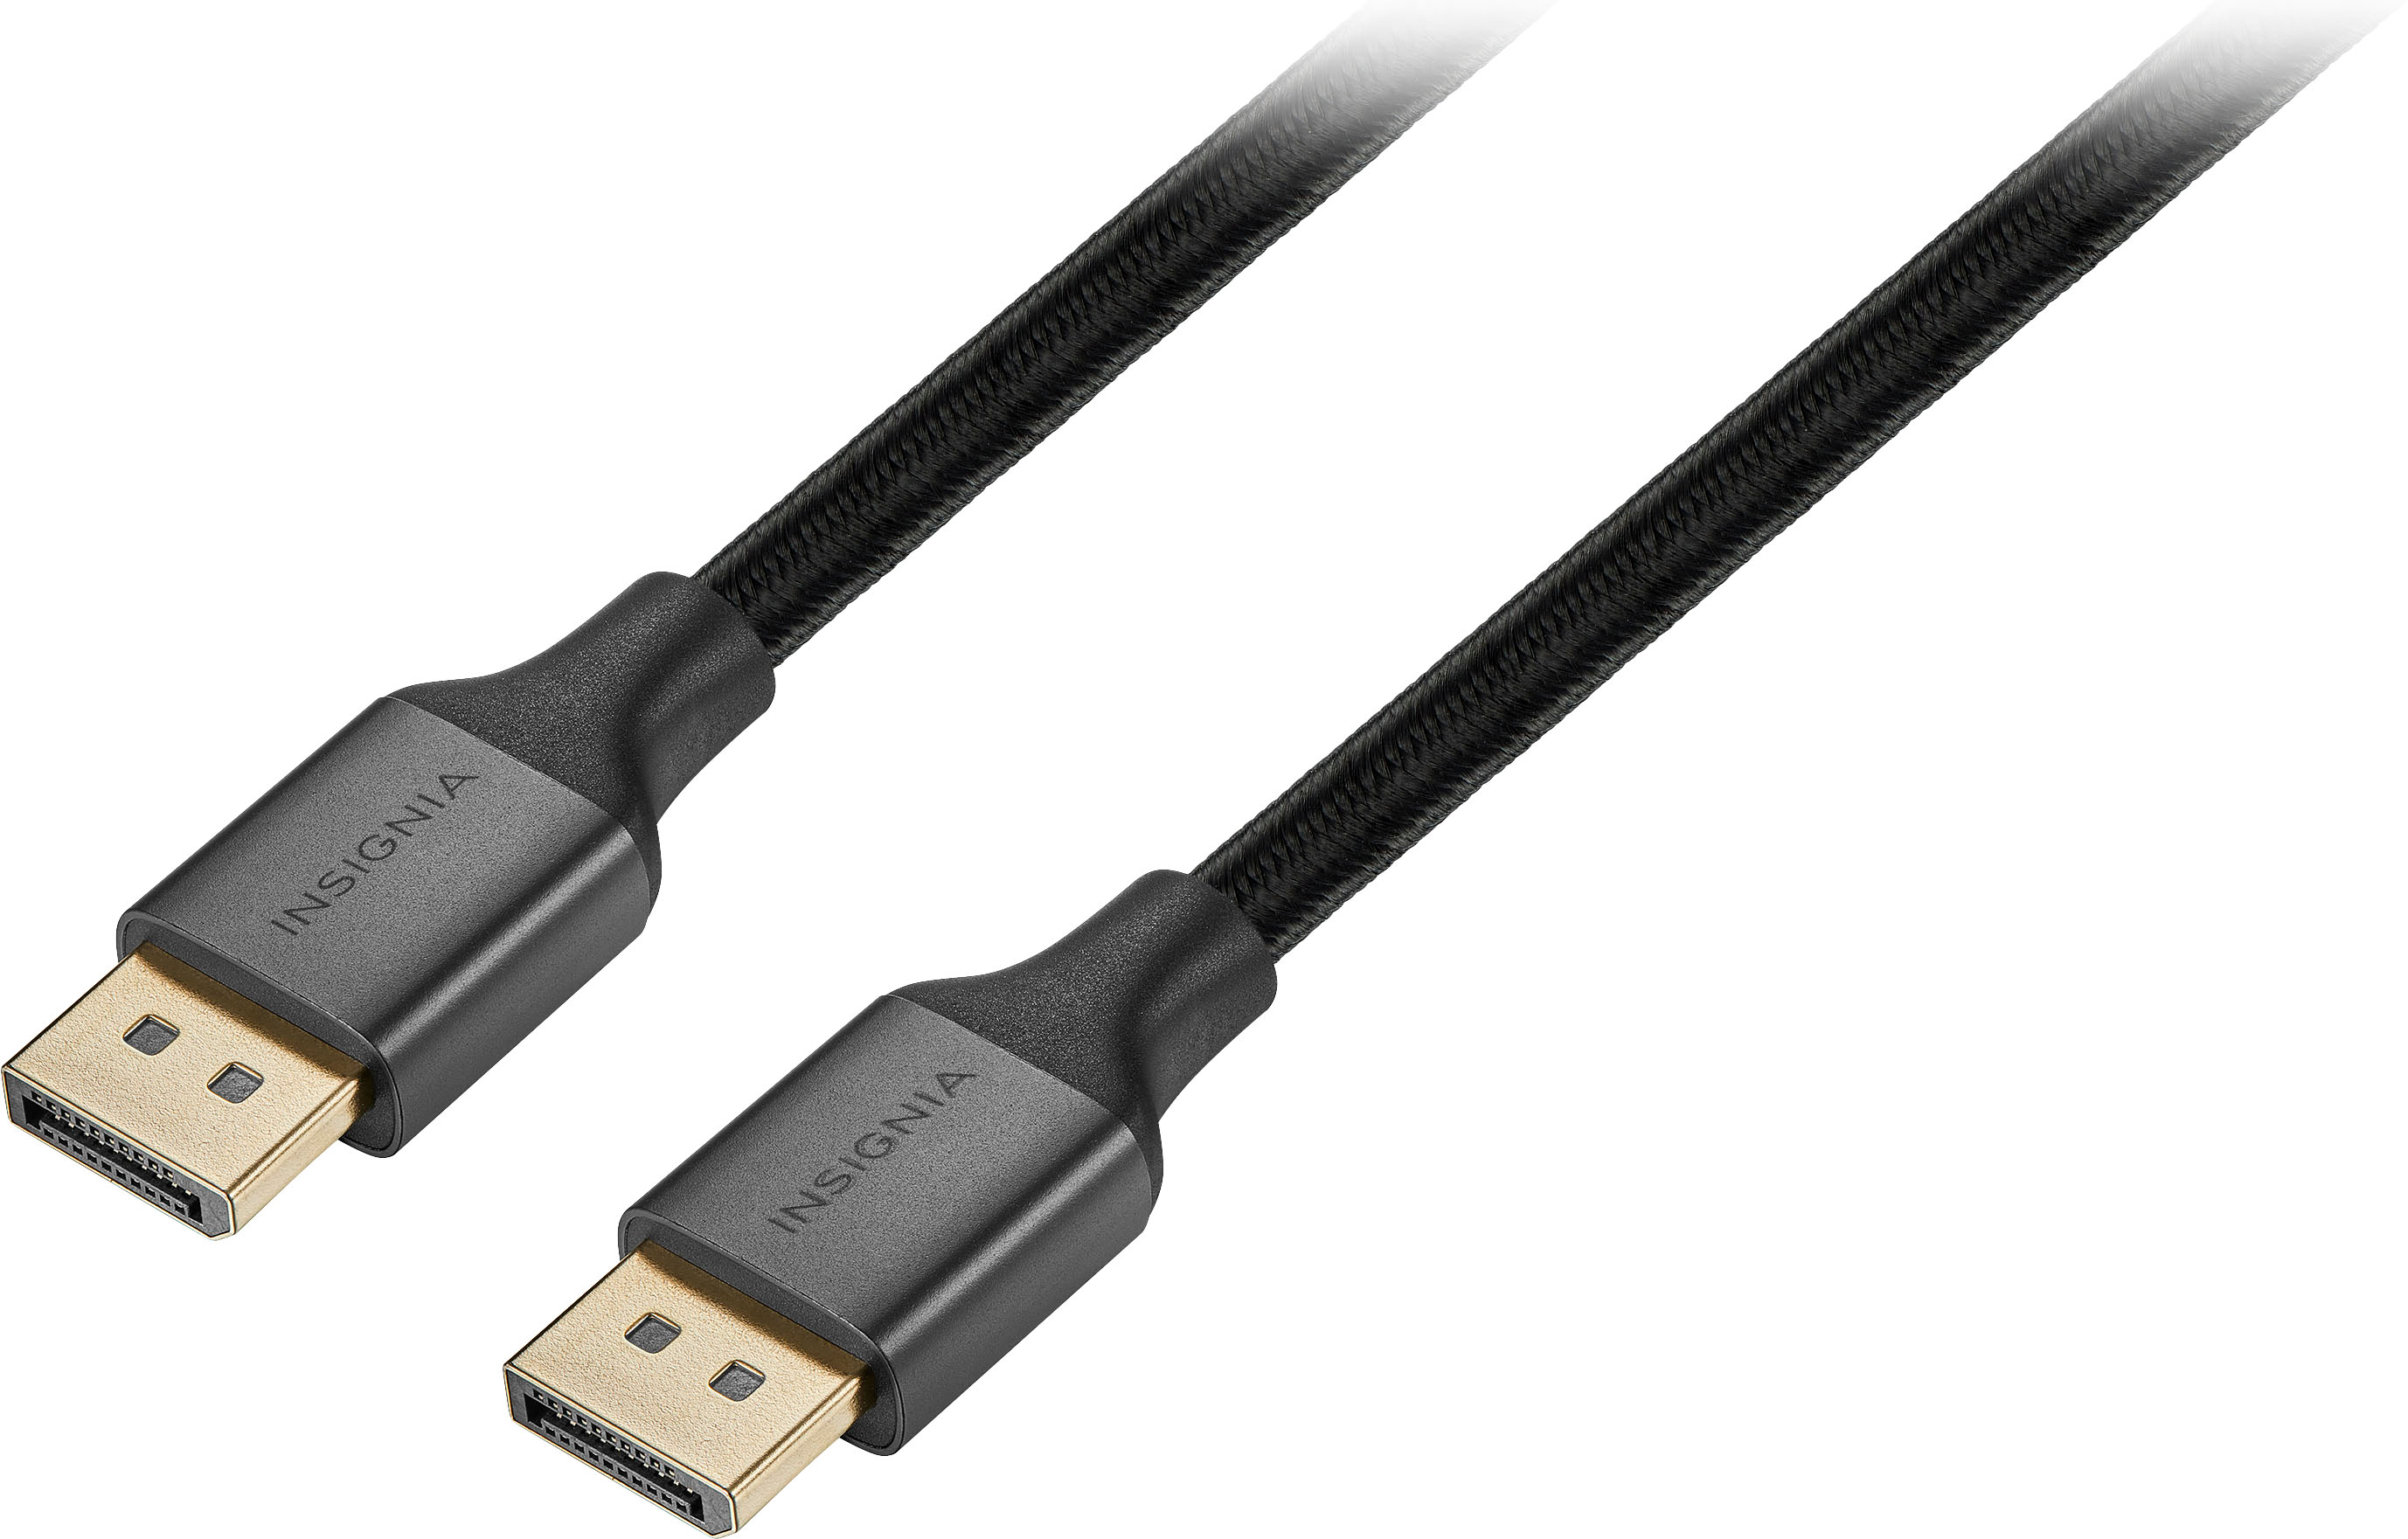 Insignia™ 10' DisplayPort Cable Black NS-PCDPDP10 - Best Buy